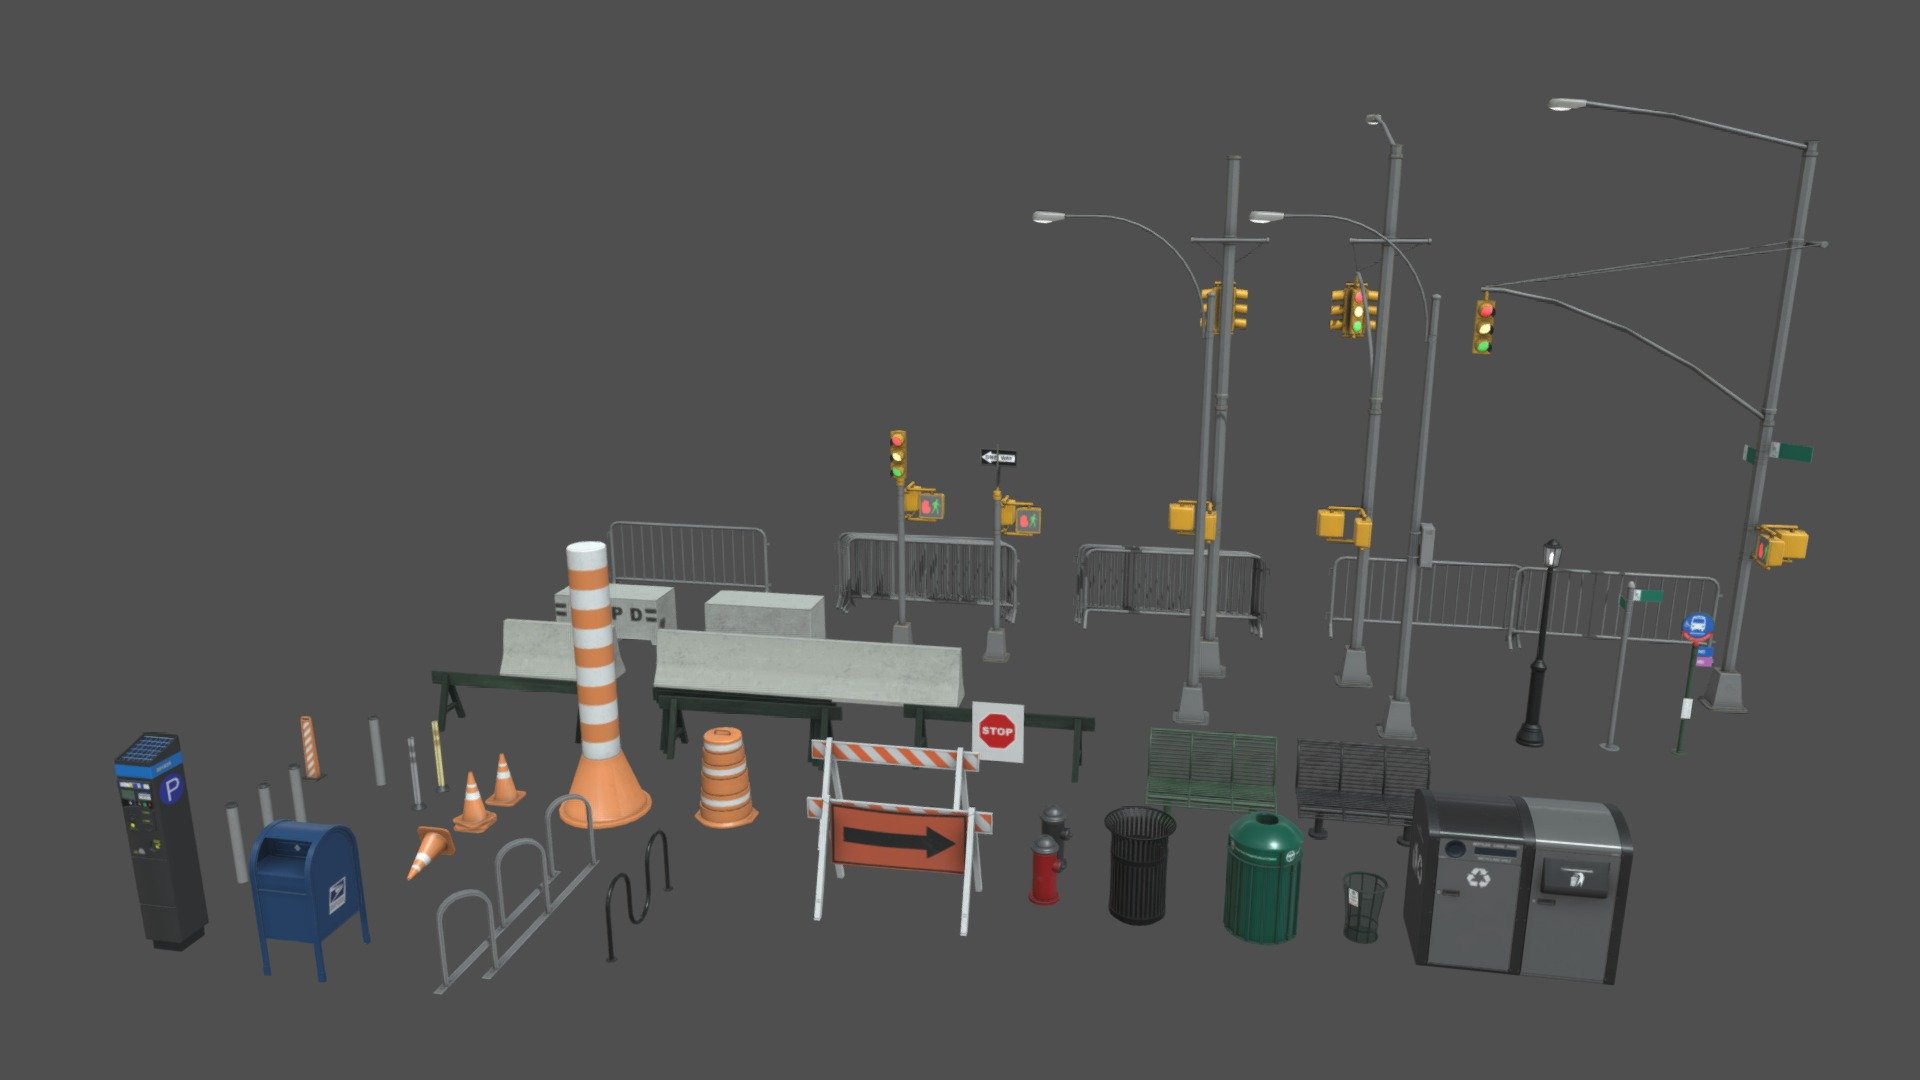 New York Street props collection

All assets are Low-Poly

1k Textures (also available 2k textures)

All assets are included in a separate file - New York Street Props - Part 1 - 3D model by arti.aaa (@umrplex) 3d model